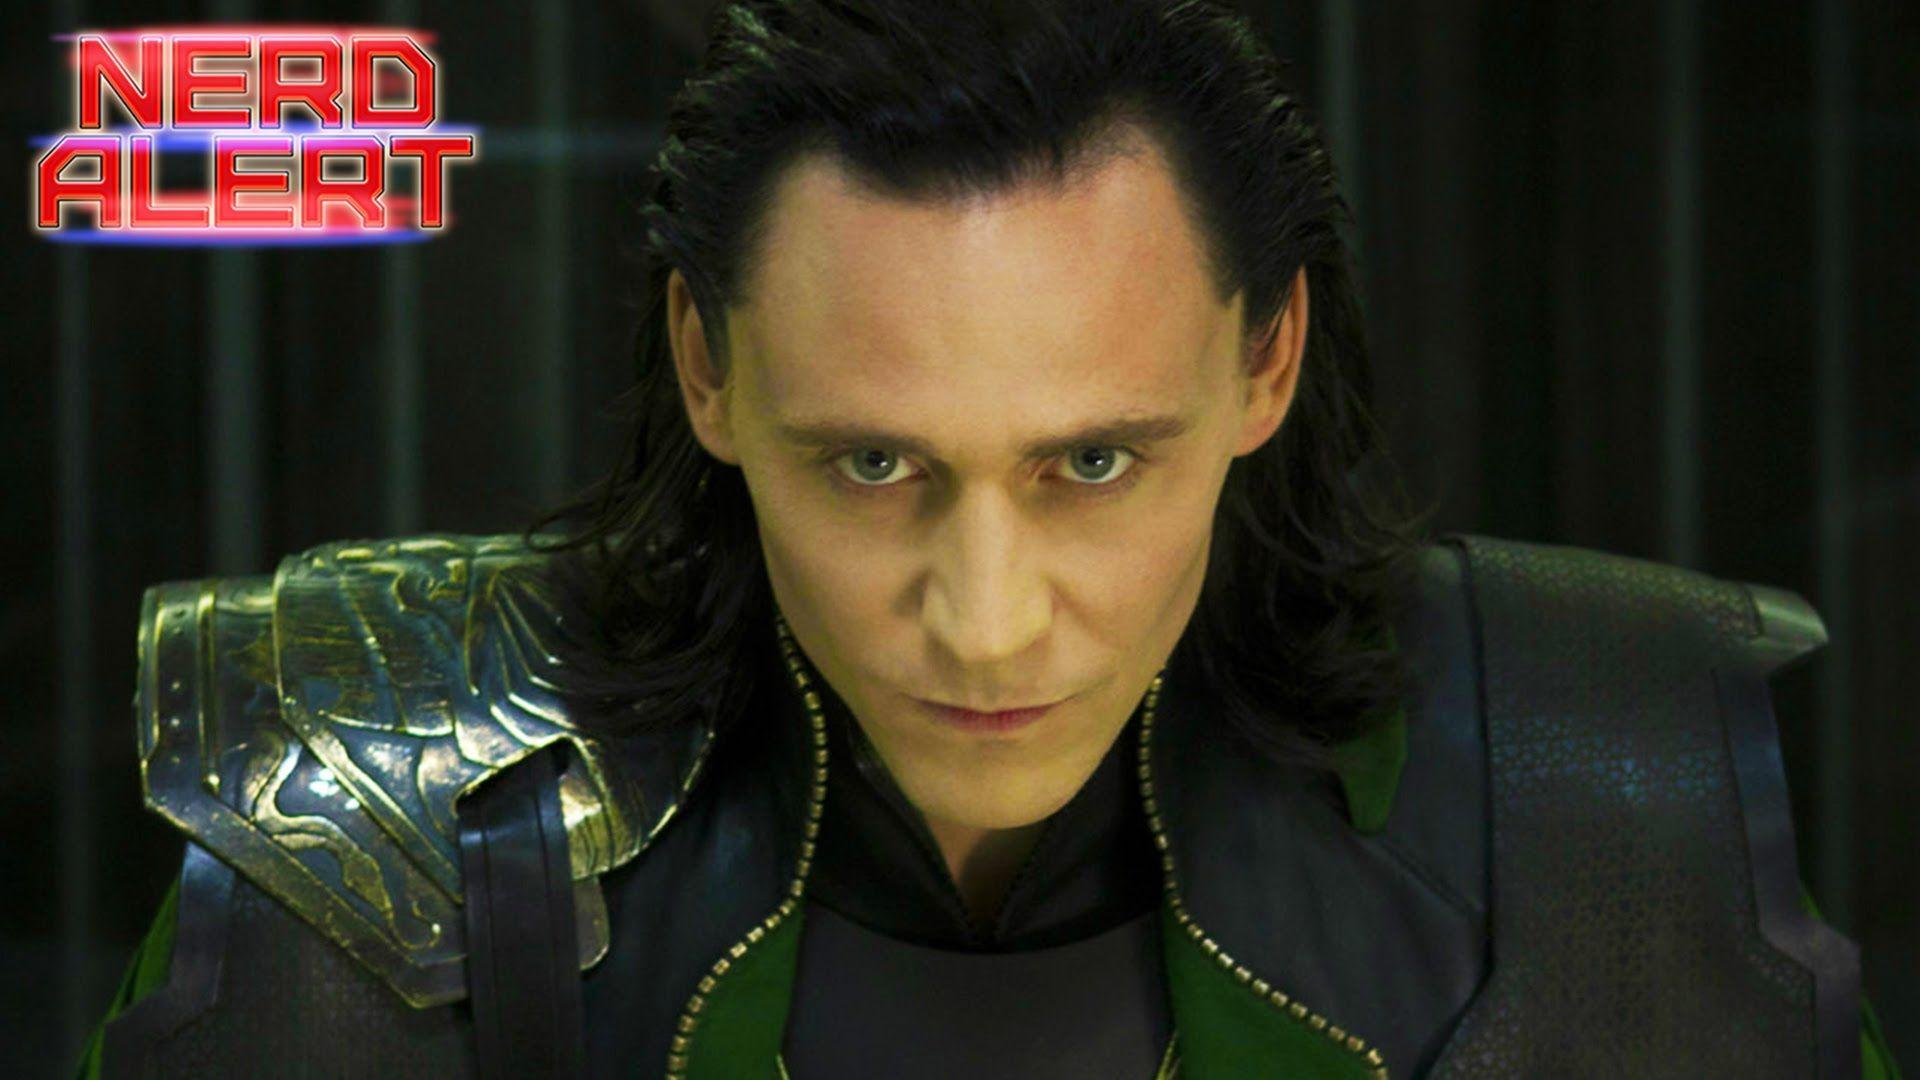 The Cut Loki Scene from Avengers: Age of Ultron Revealed